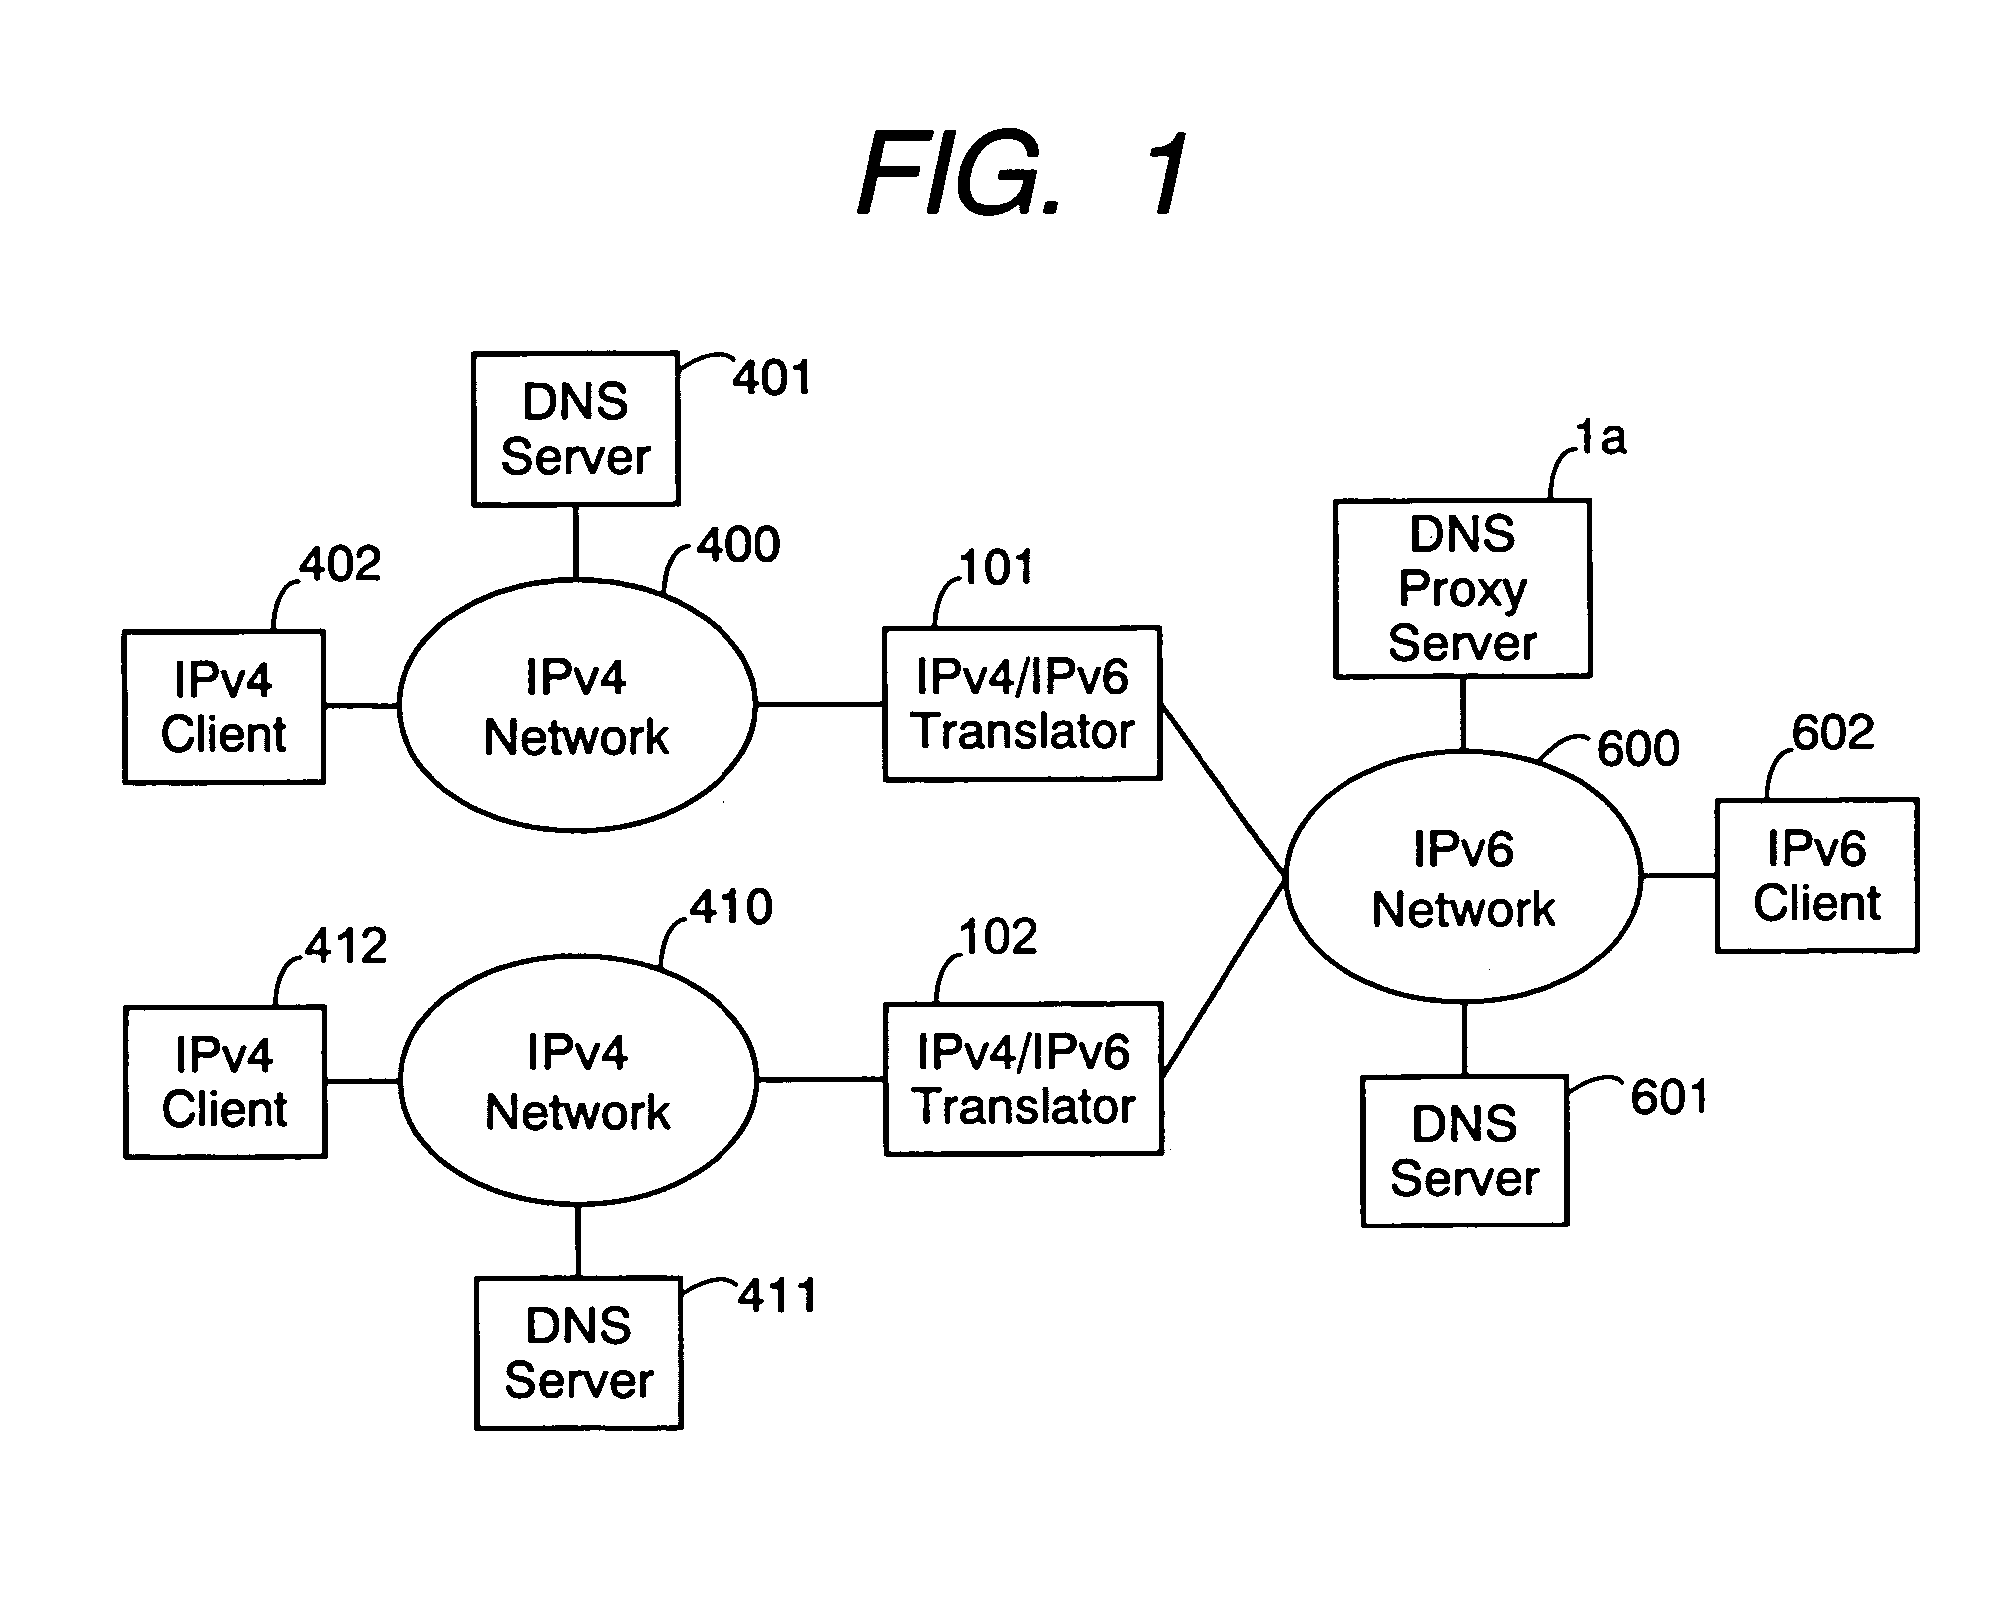 Apparatus and method for data communication on packet-switching network